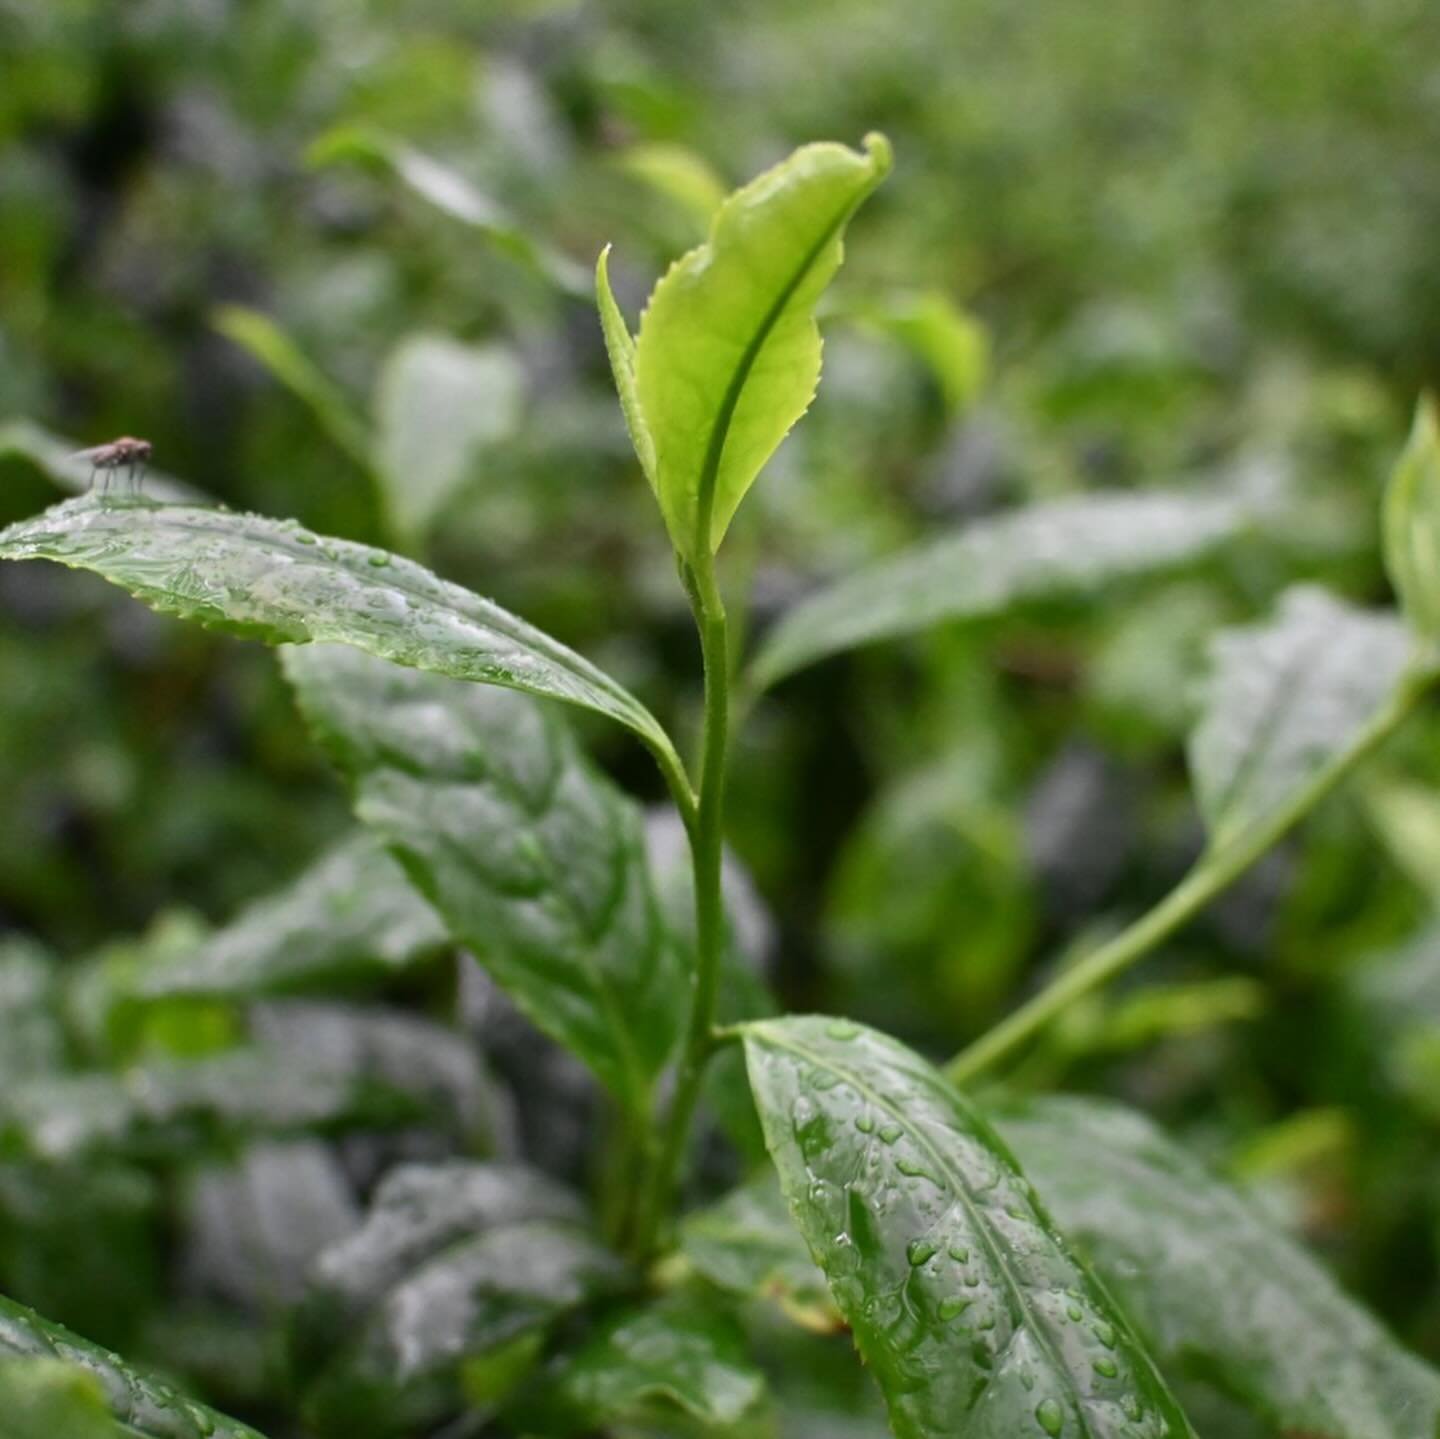 Spring Tea Fields. Shincha 2024.
The new teas from Kagoshima are harvested and ready to be enjoyed - the farmer&rsquo;s promise delicate flavors this year.

The first selection of Shincha 2024 teas will be available in a few weeks.

#japanesetea #org